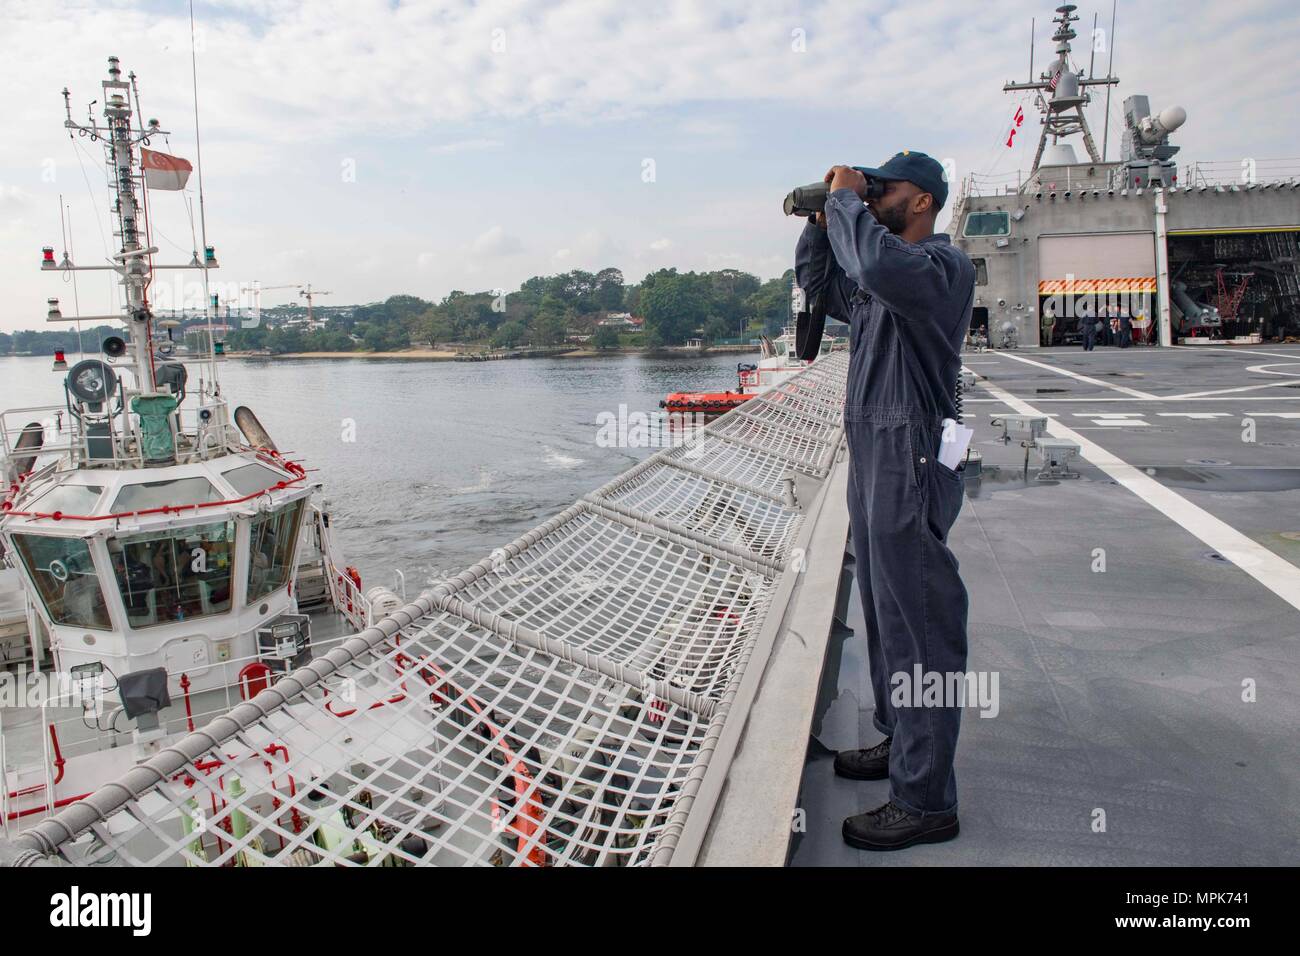 170323-N-WV703-054 SEMBAWANG WHARVES, Singapore (March 23, 2017) Chief Gunners Mate Jason Kelly, from Chicago, Ill